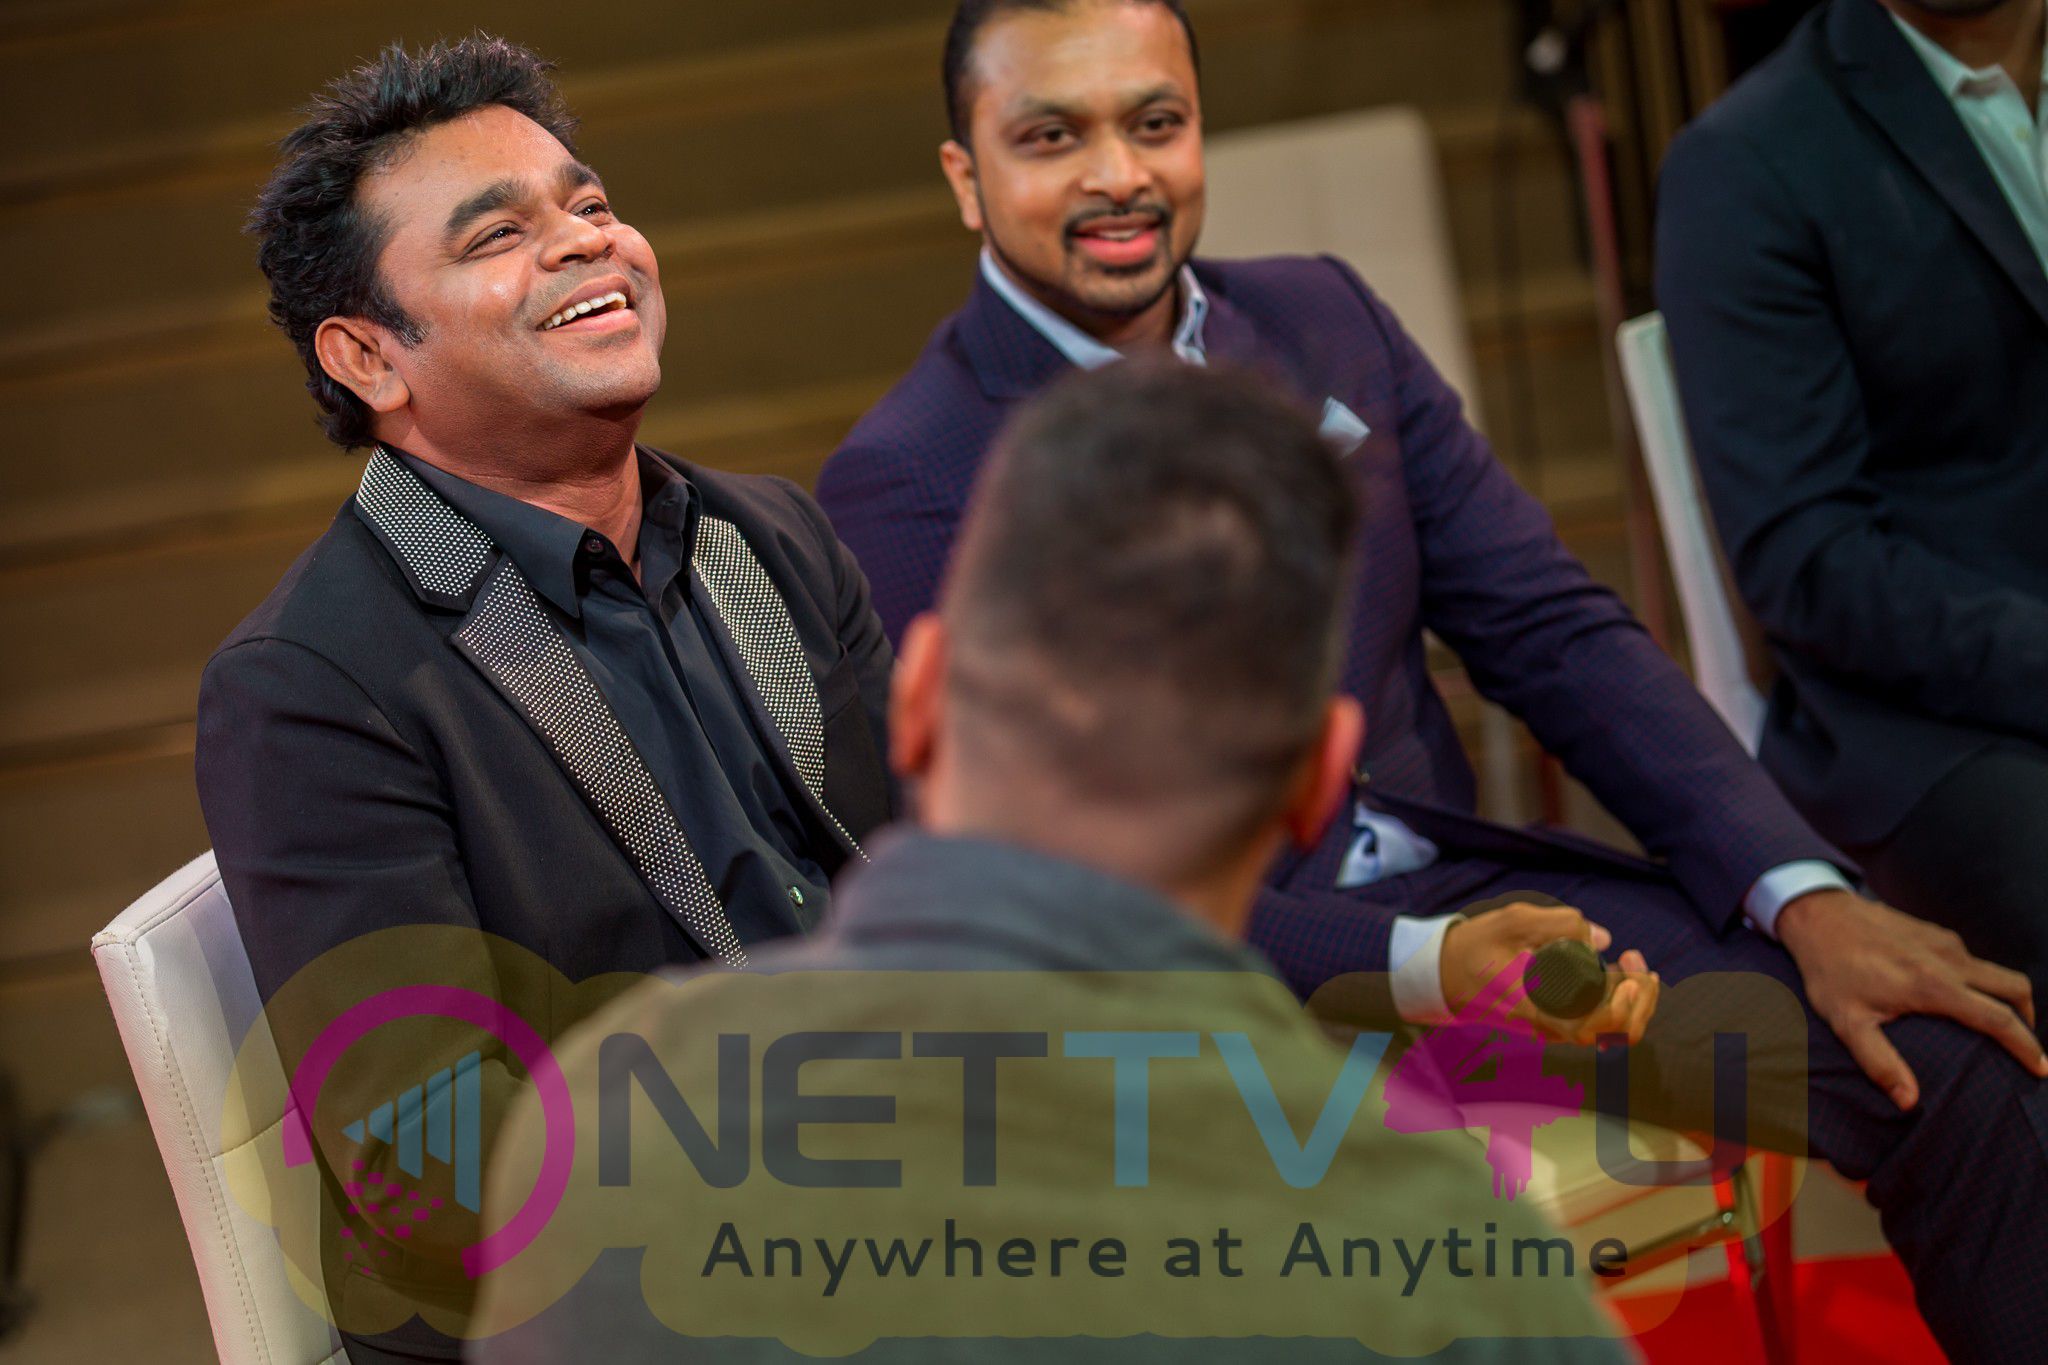 Marvelous Photos Of AR Rahman Launches Ideal Entertainment Production Company, 99 Songs (Film) And His Directorial Debut Le Musk